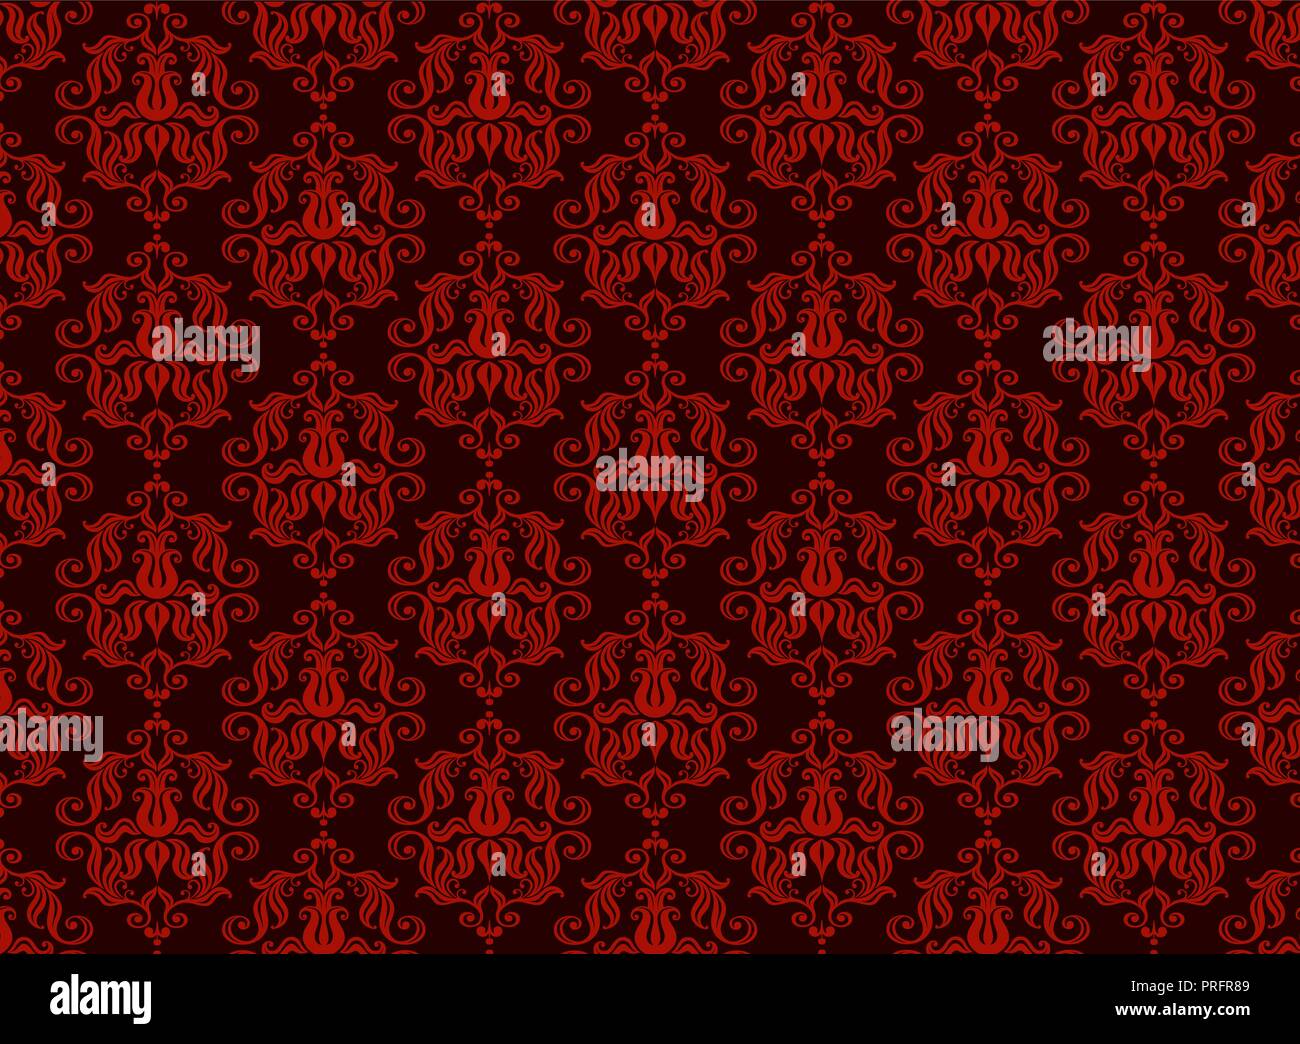 Seamless Luxury Ornamental Background Red Damask Seamless Floral